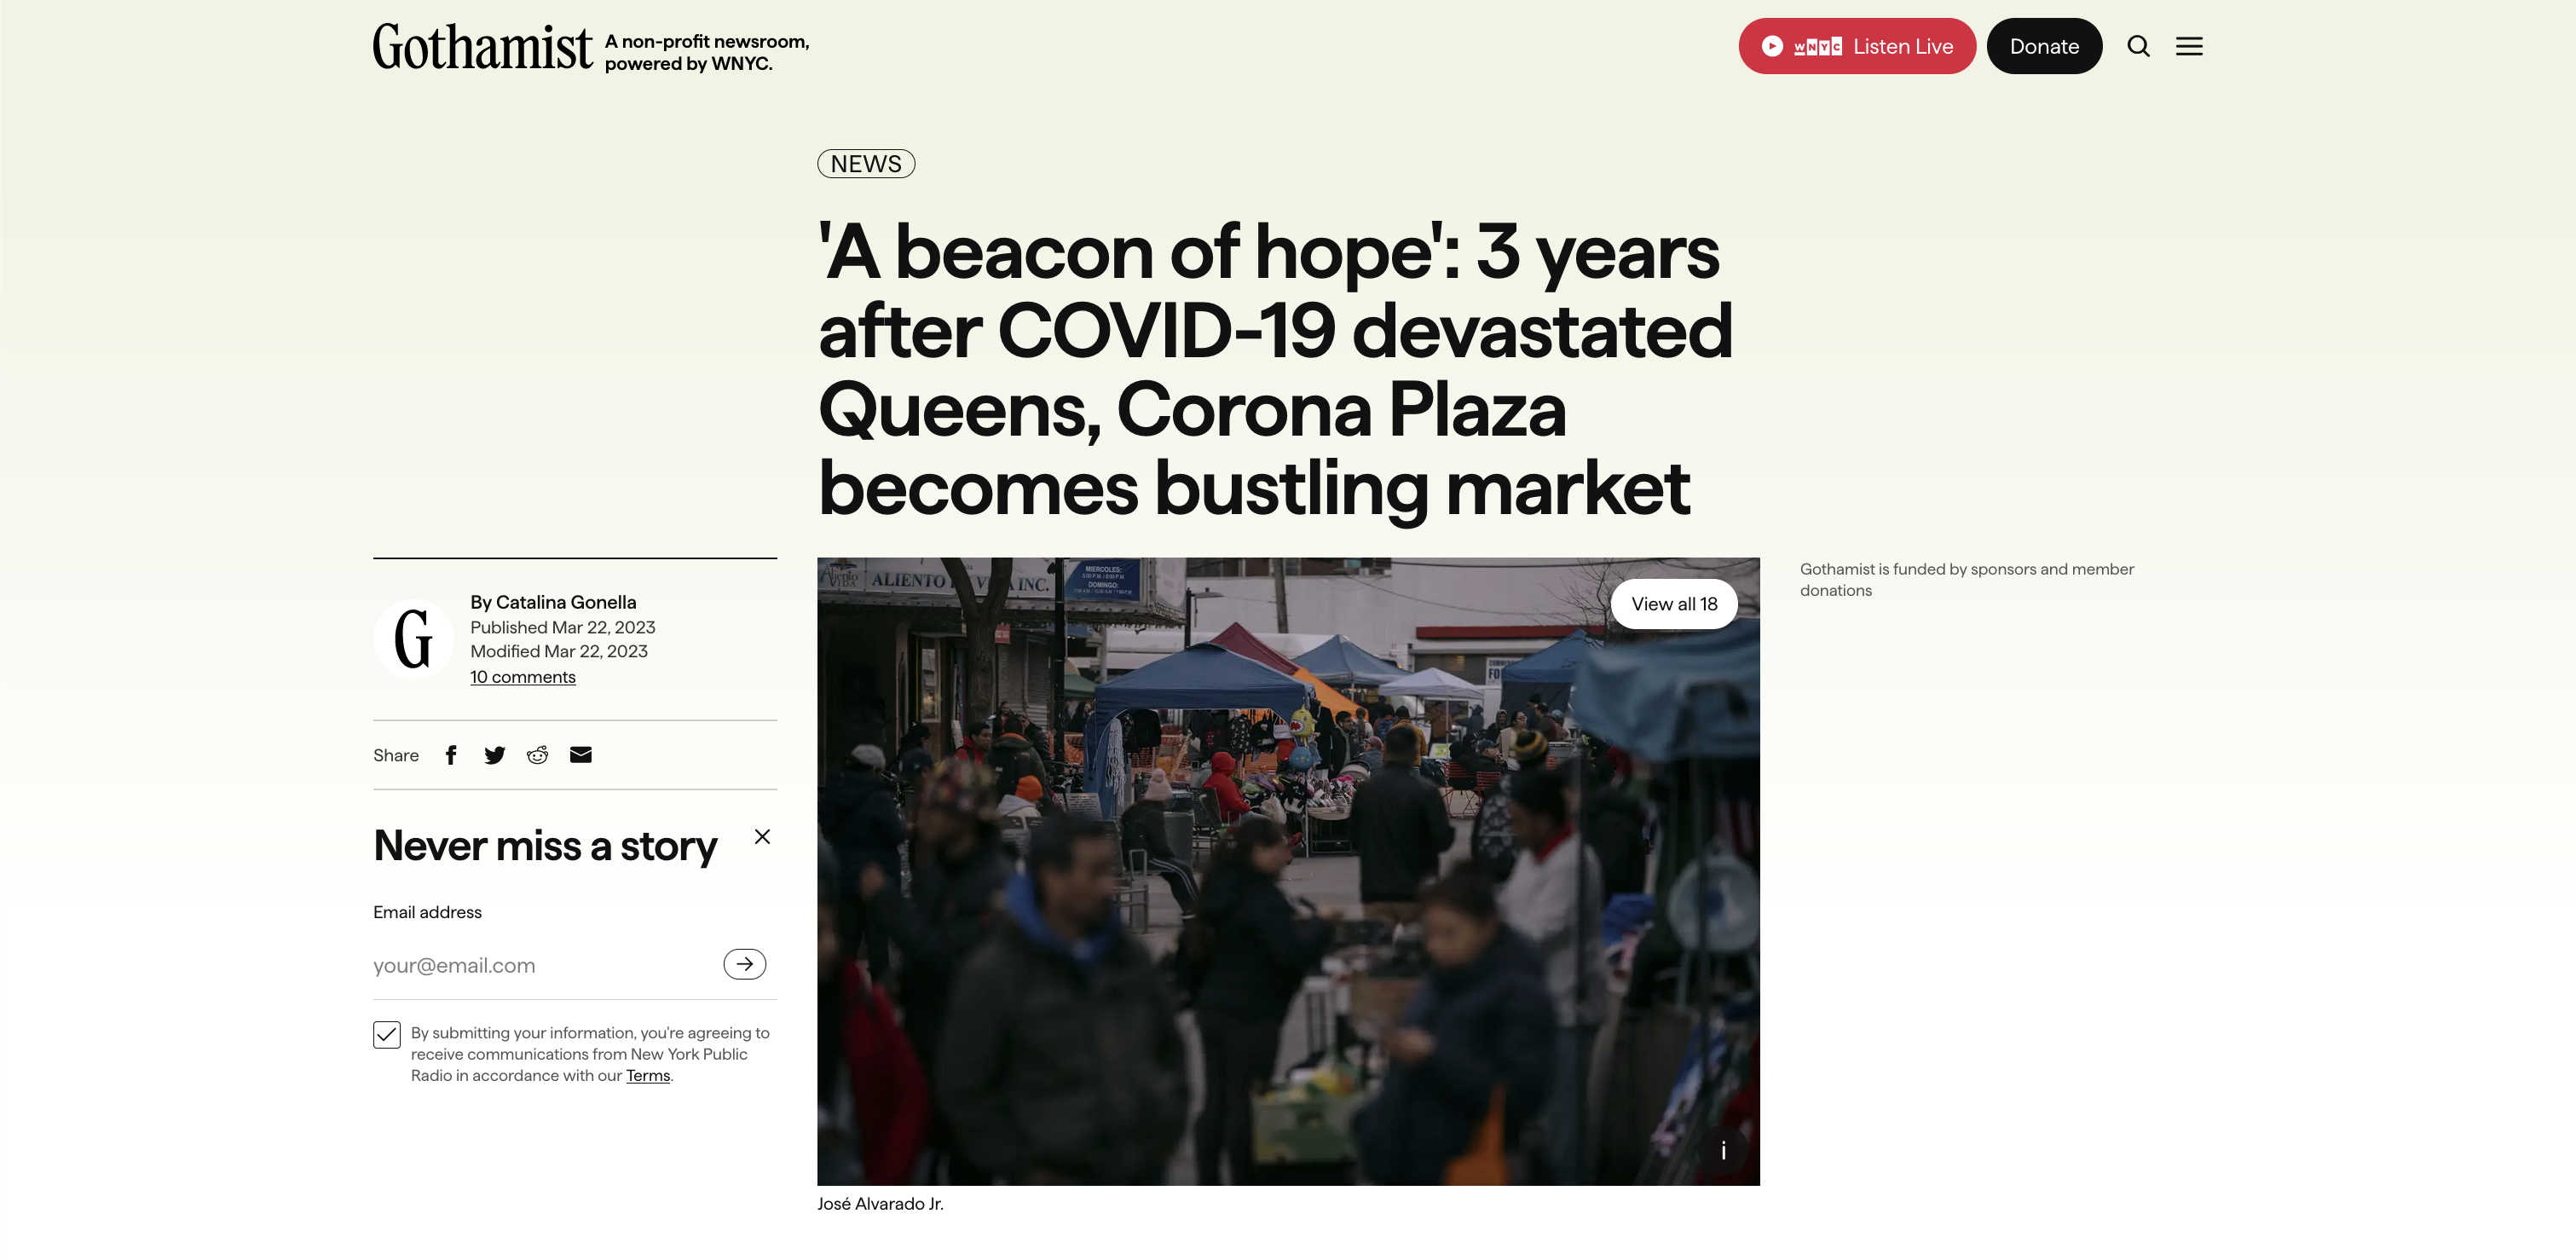 for Gothamist: 'A beacon of hope': 3 years after COVID-19 devastated Queens, Corona Plaza becomes bustling market